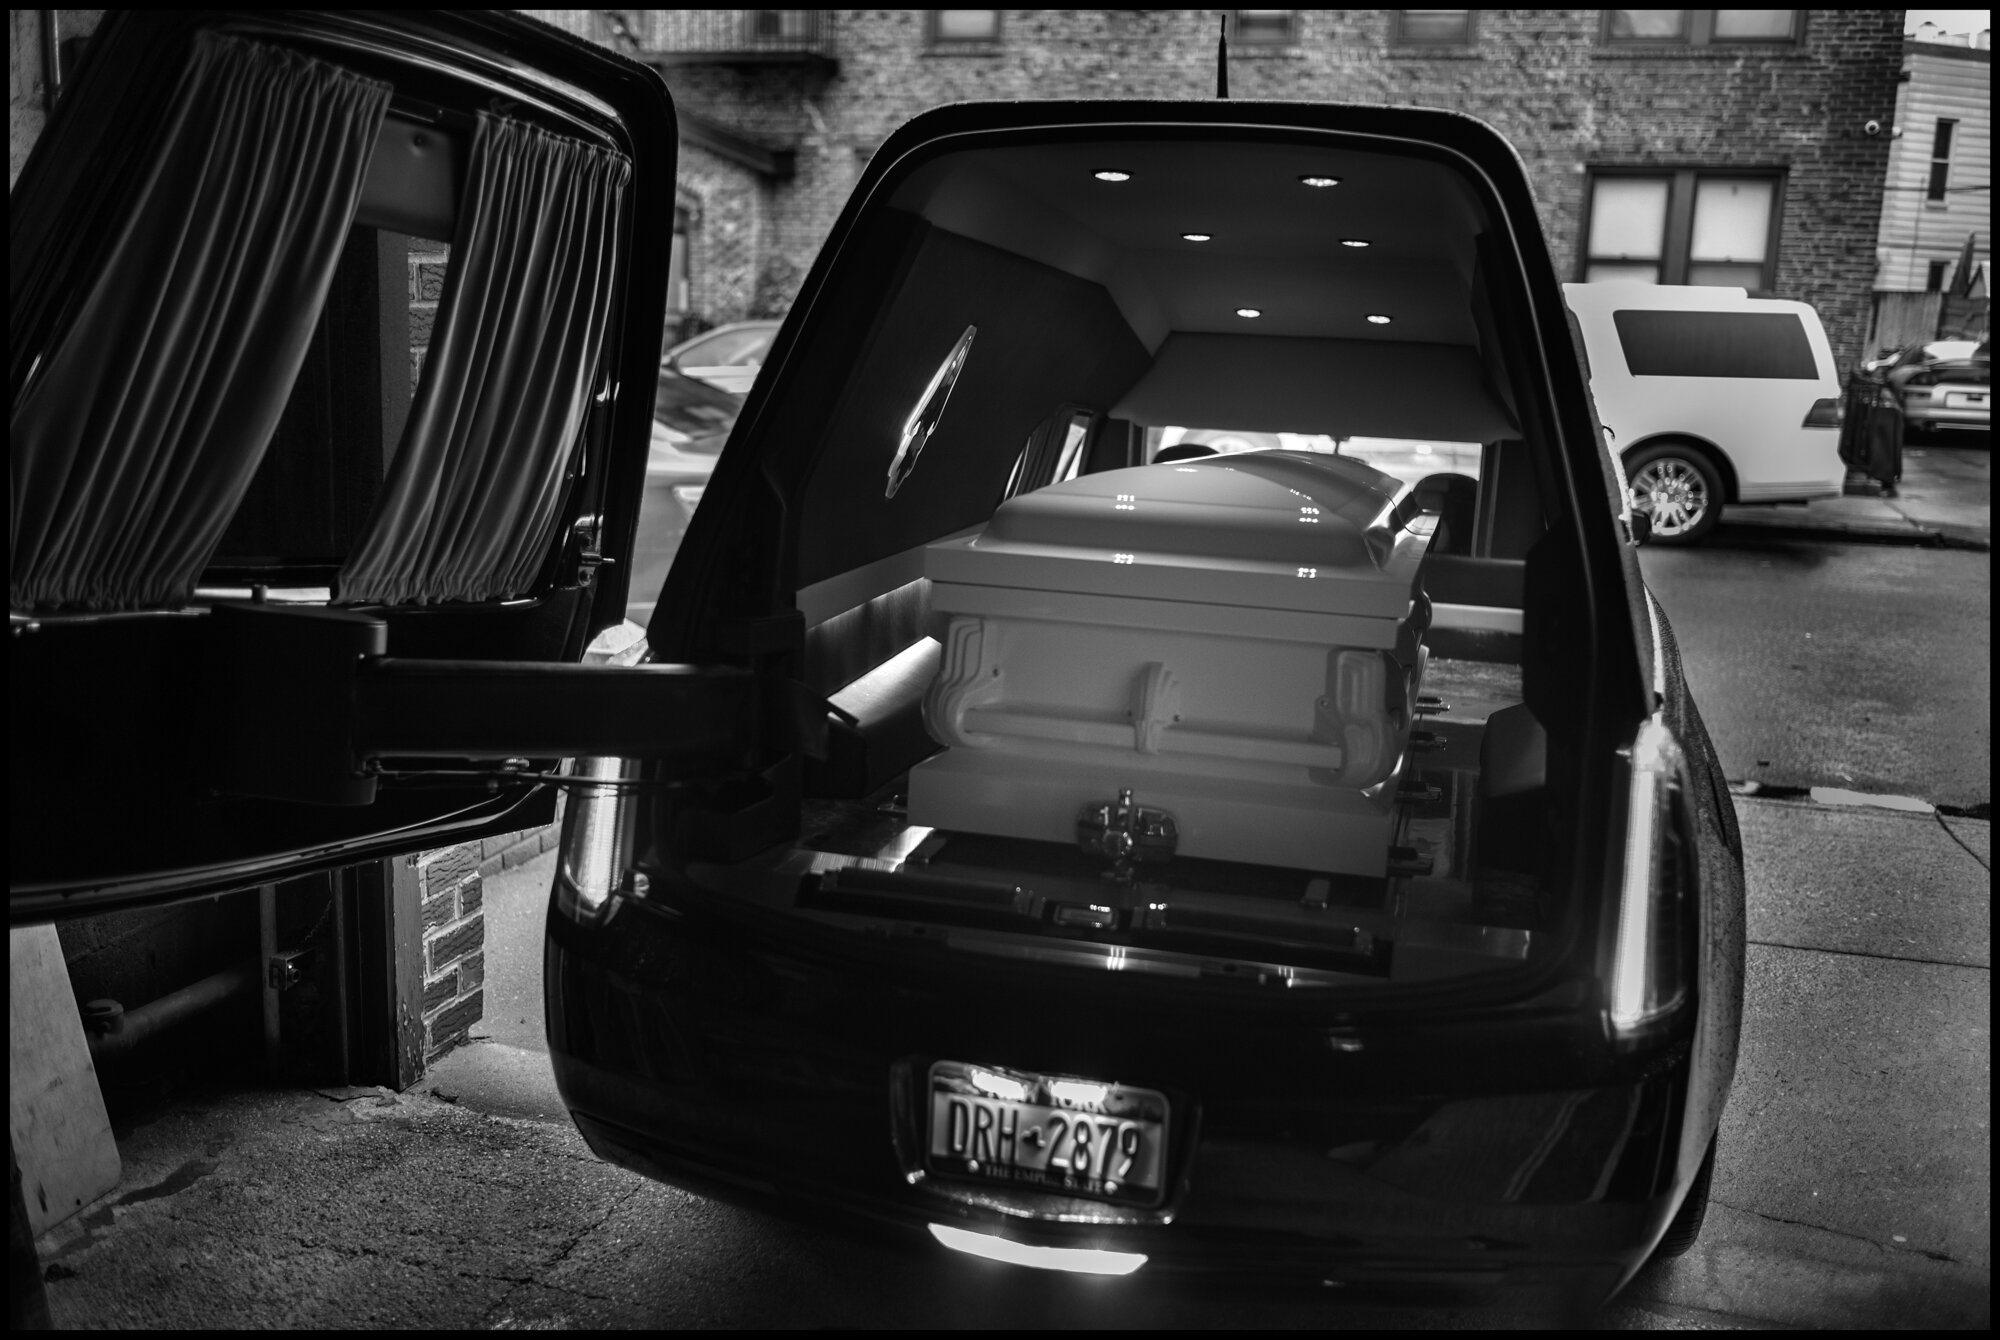  The casket of a victim of coronavirus-19 waits to go to burial. Brooklyn, New York.  April, 2020. © Peter Turnley.  ID# 51-001 